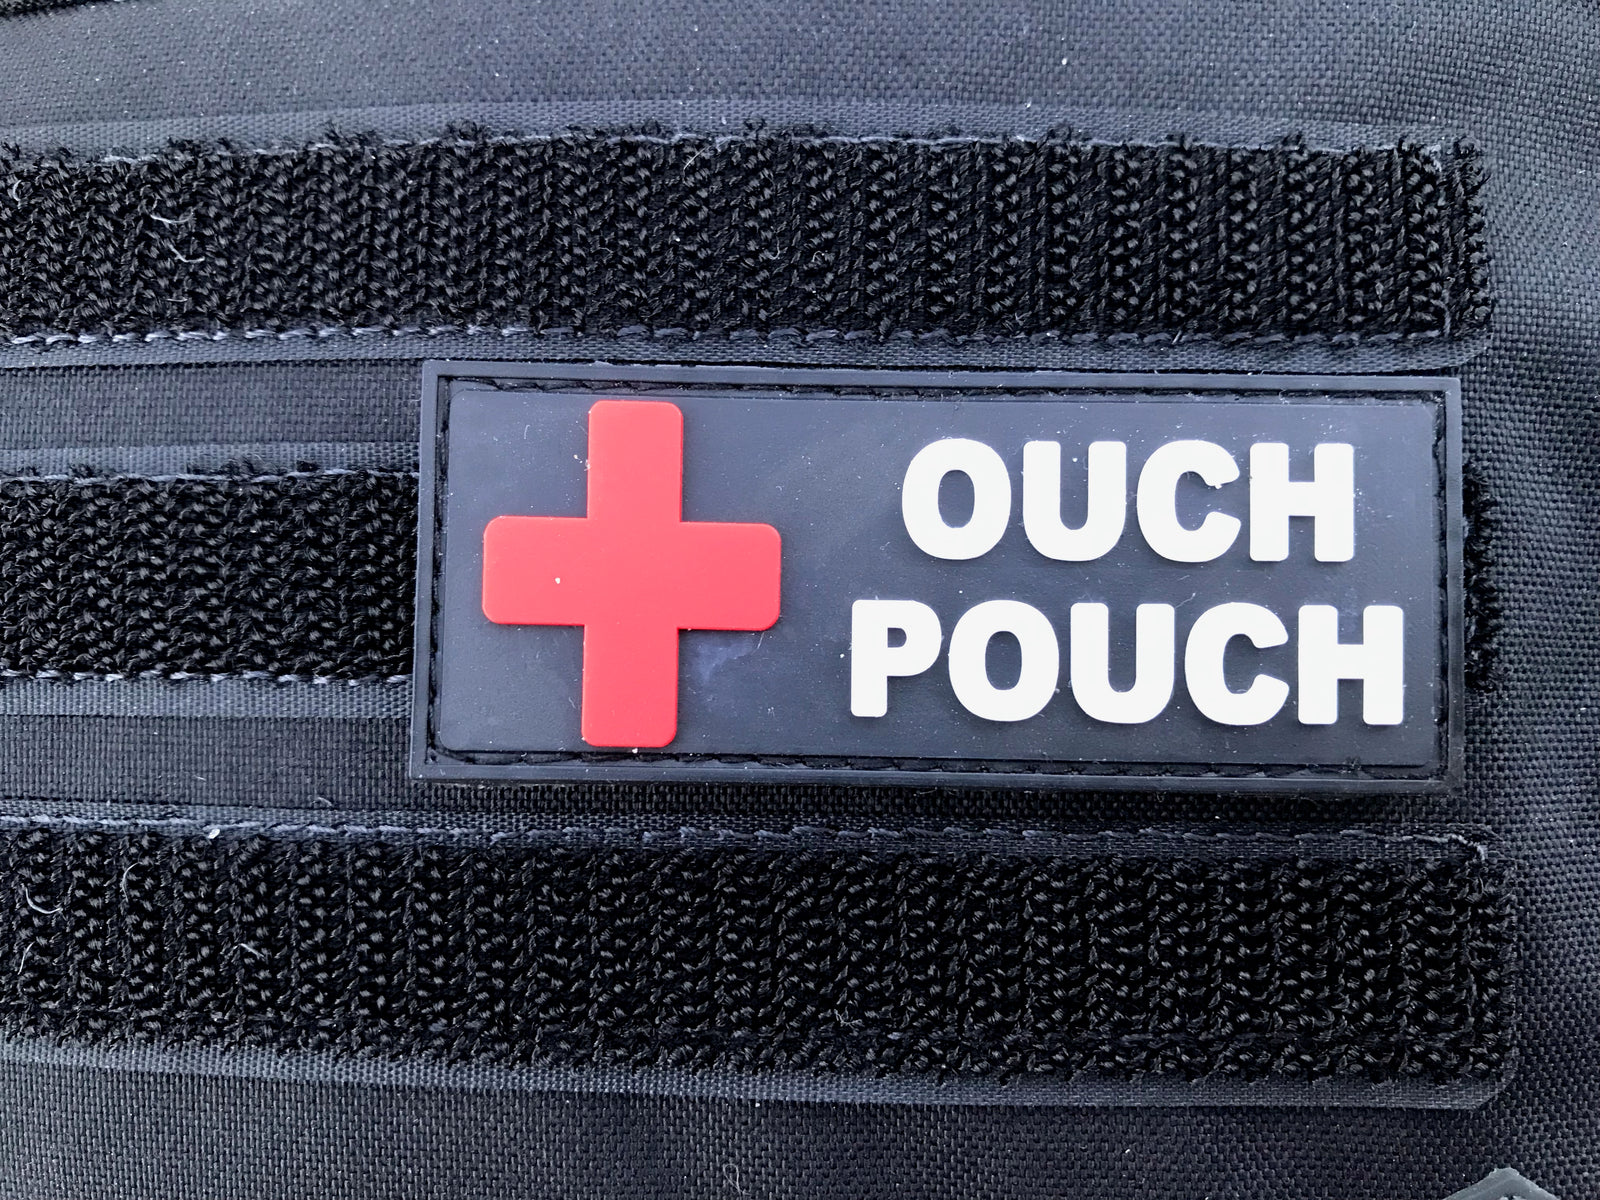 Ouch Pouch 1 x 3 PVC Patch